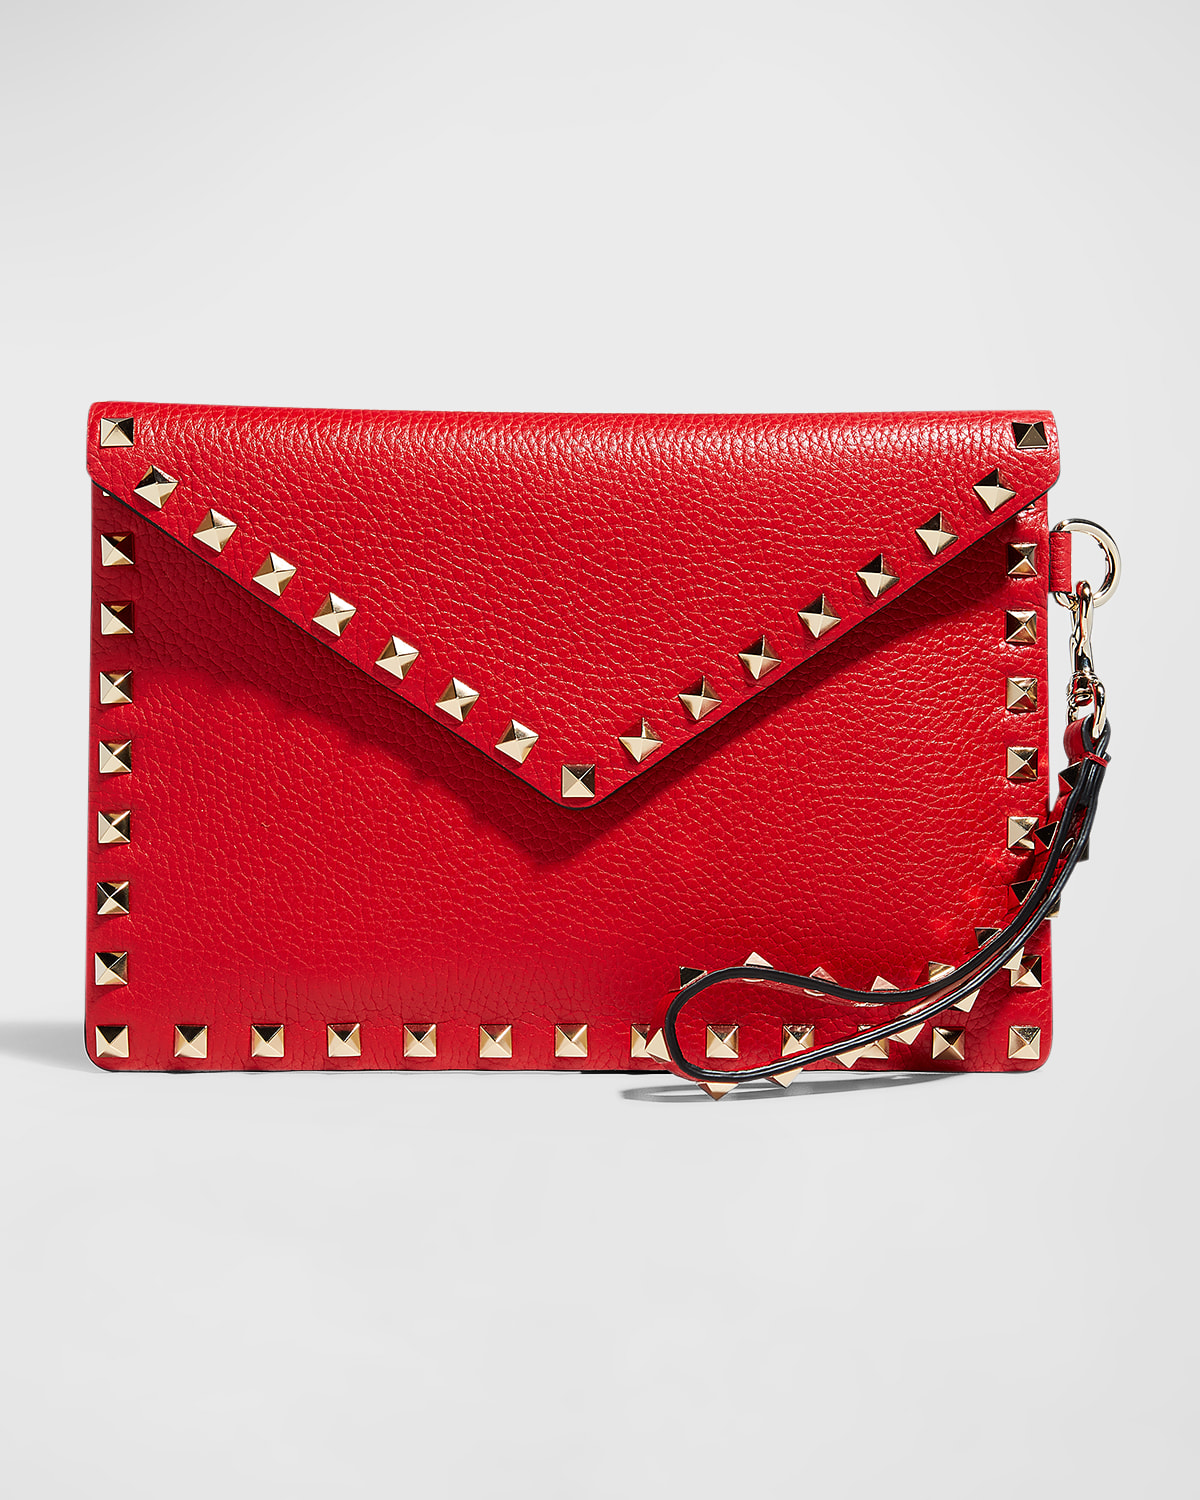 Red Valentino Leather Bag | Neiman Marcus